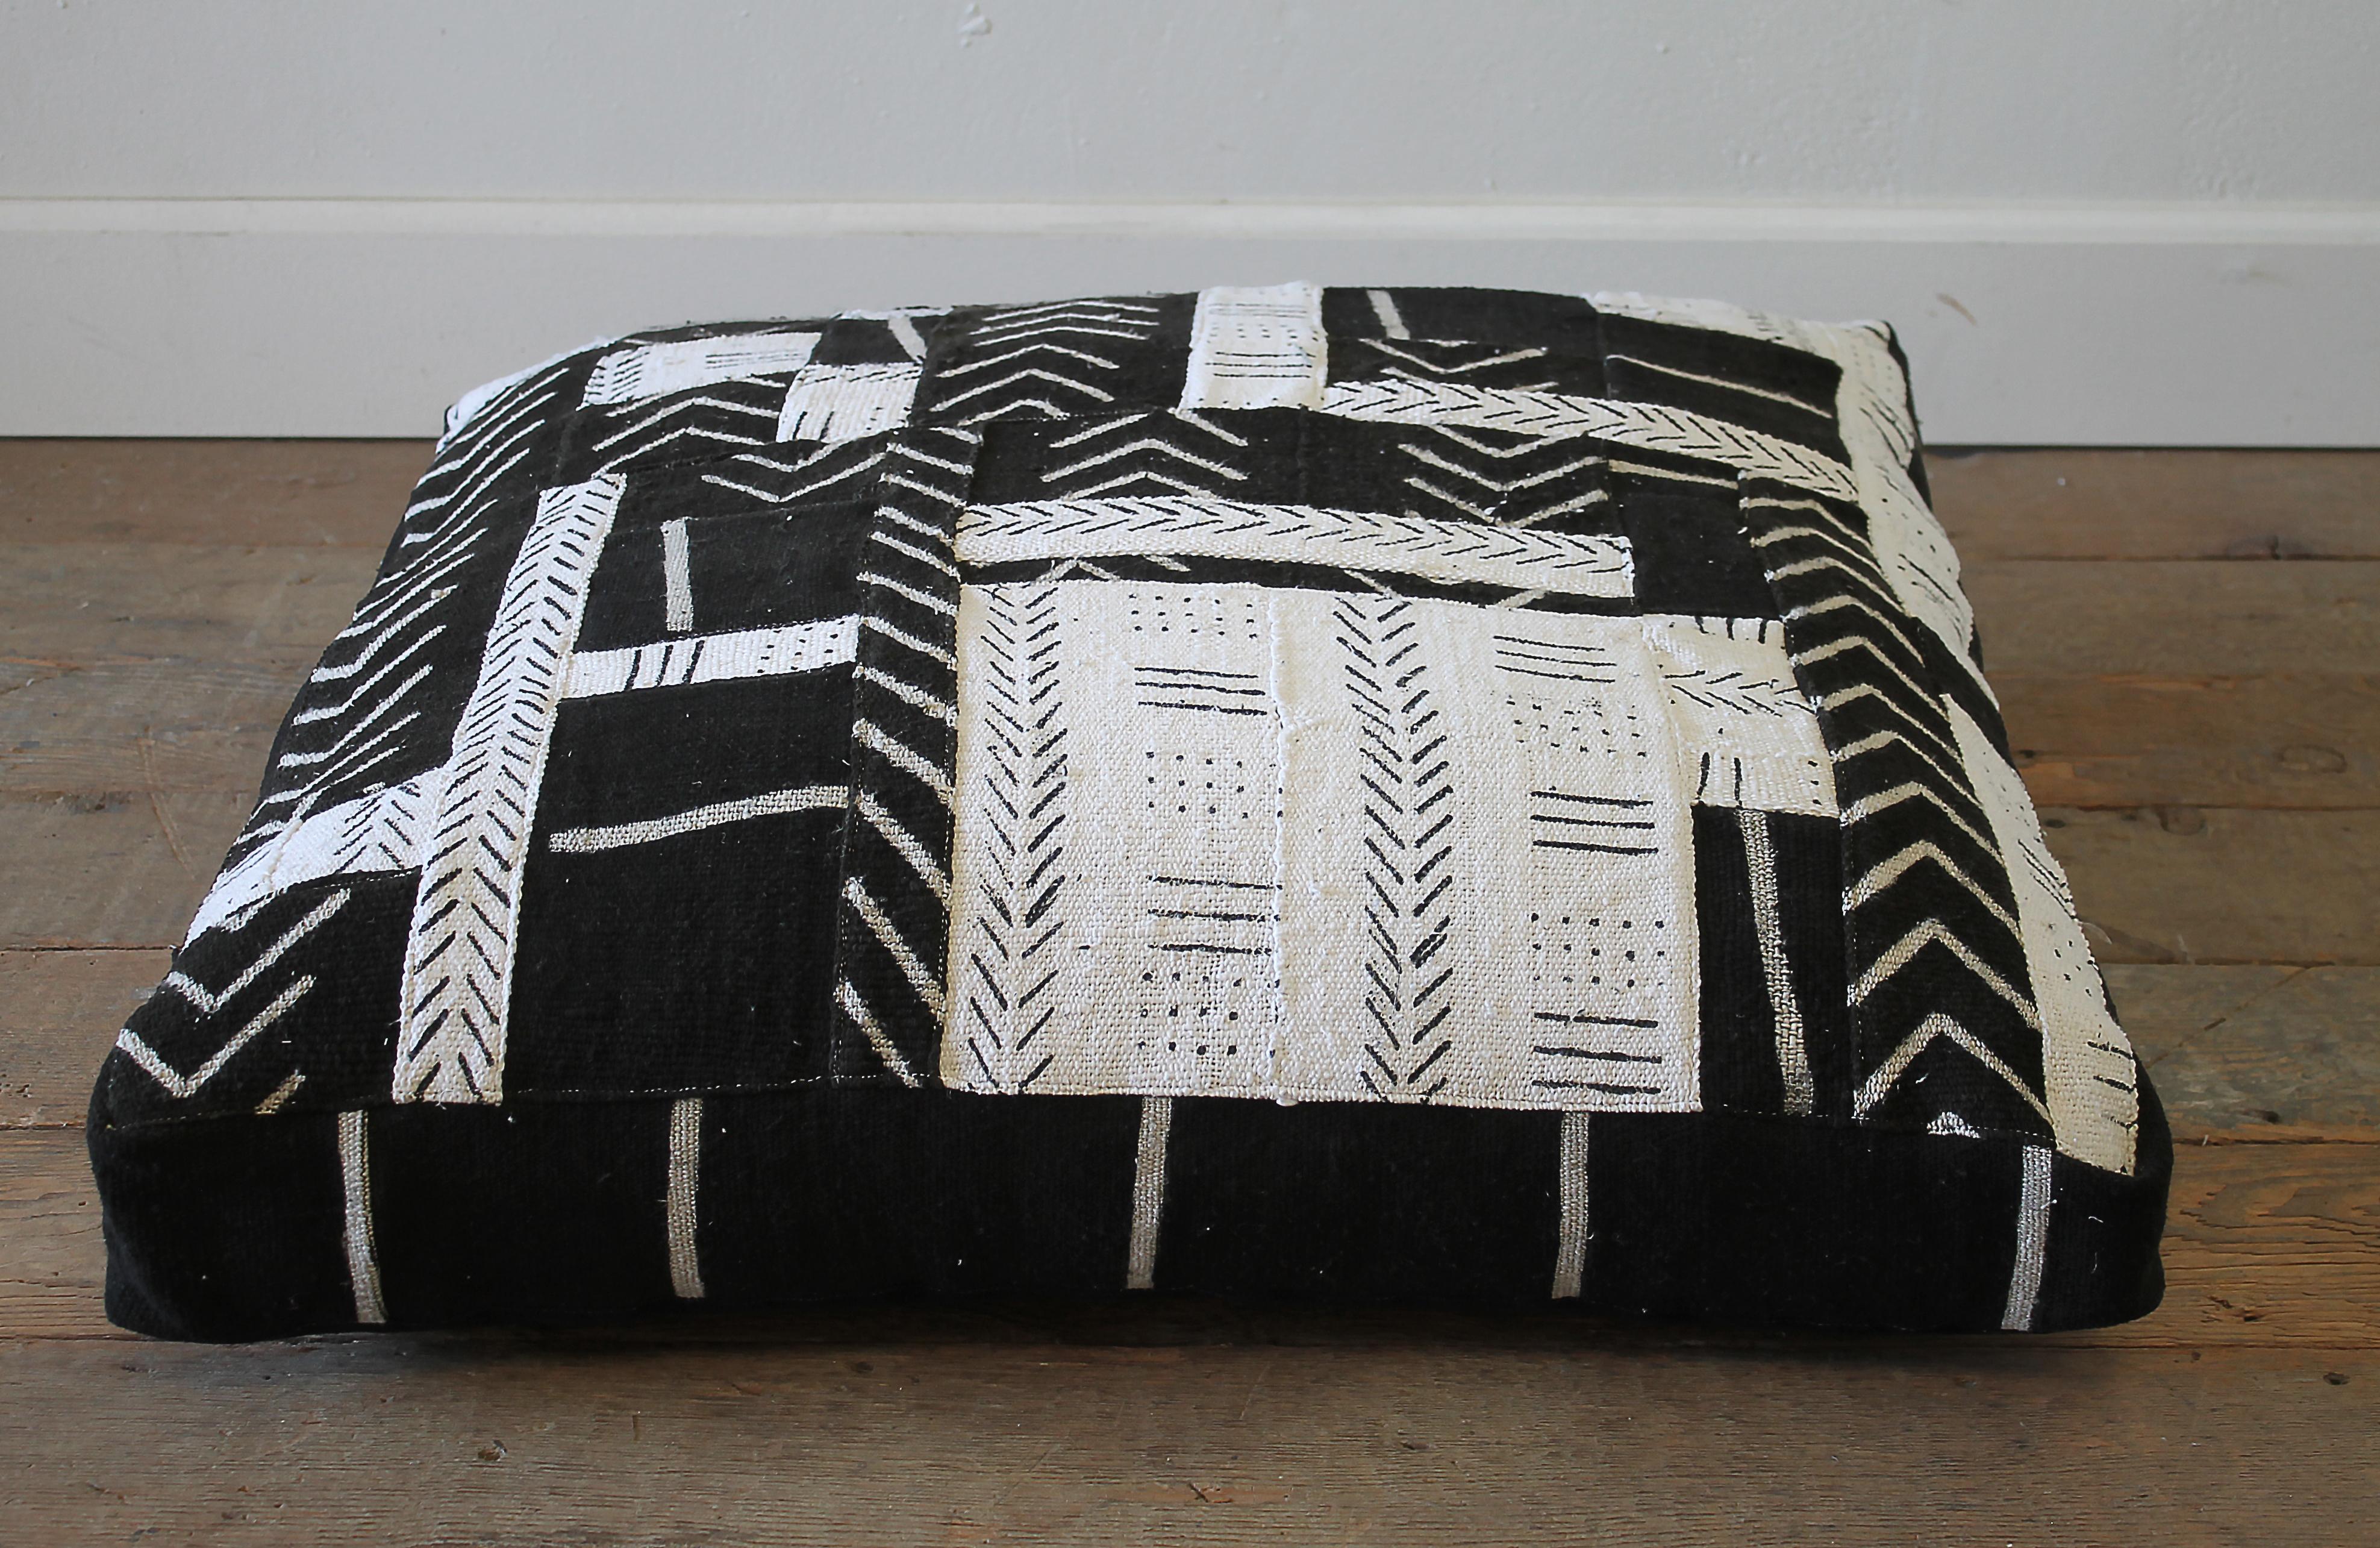 Vintage African mud cloth floor pillow pet bed by Full Bloom Cottage
Custom designed from vintage pieces of African mud cloths, with a black linen bottom. Zipper closure, this cover can be machine washed when needed. We custom-made inserts from a